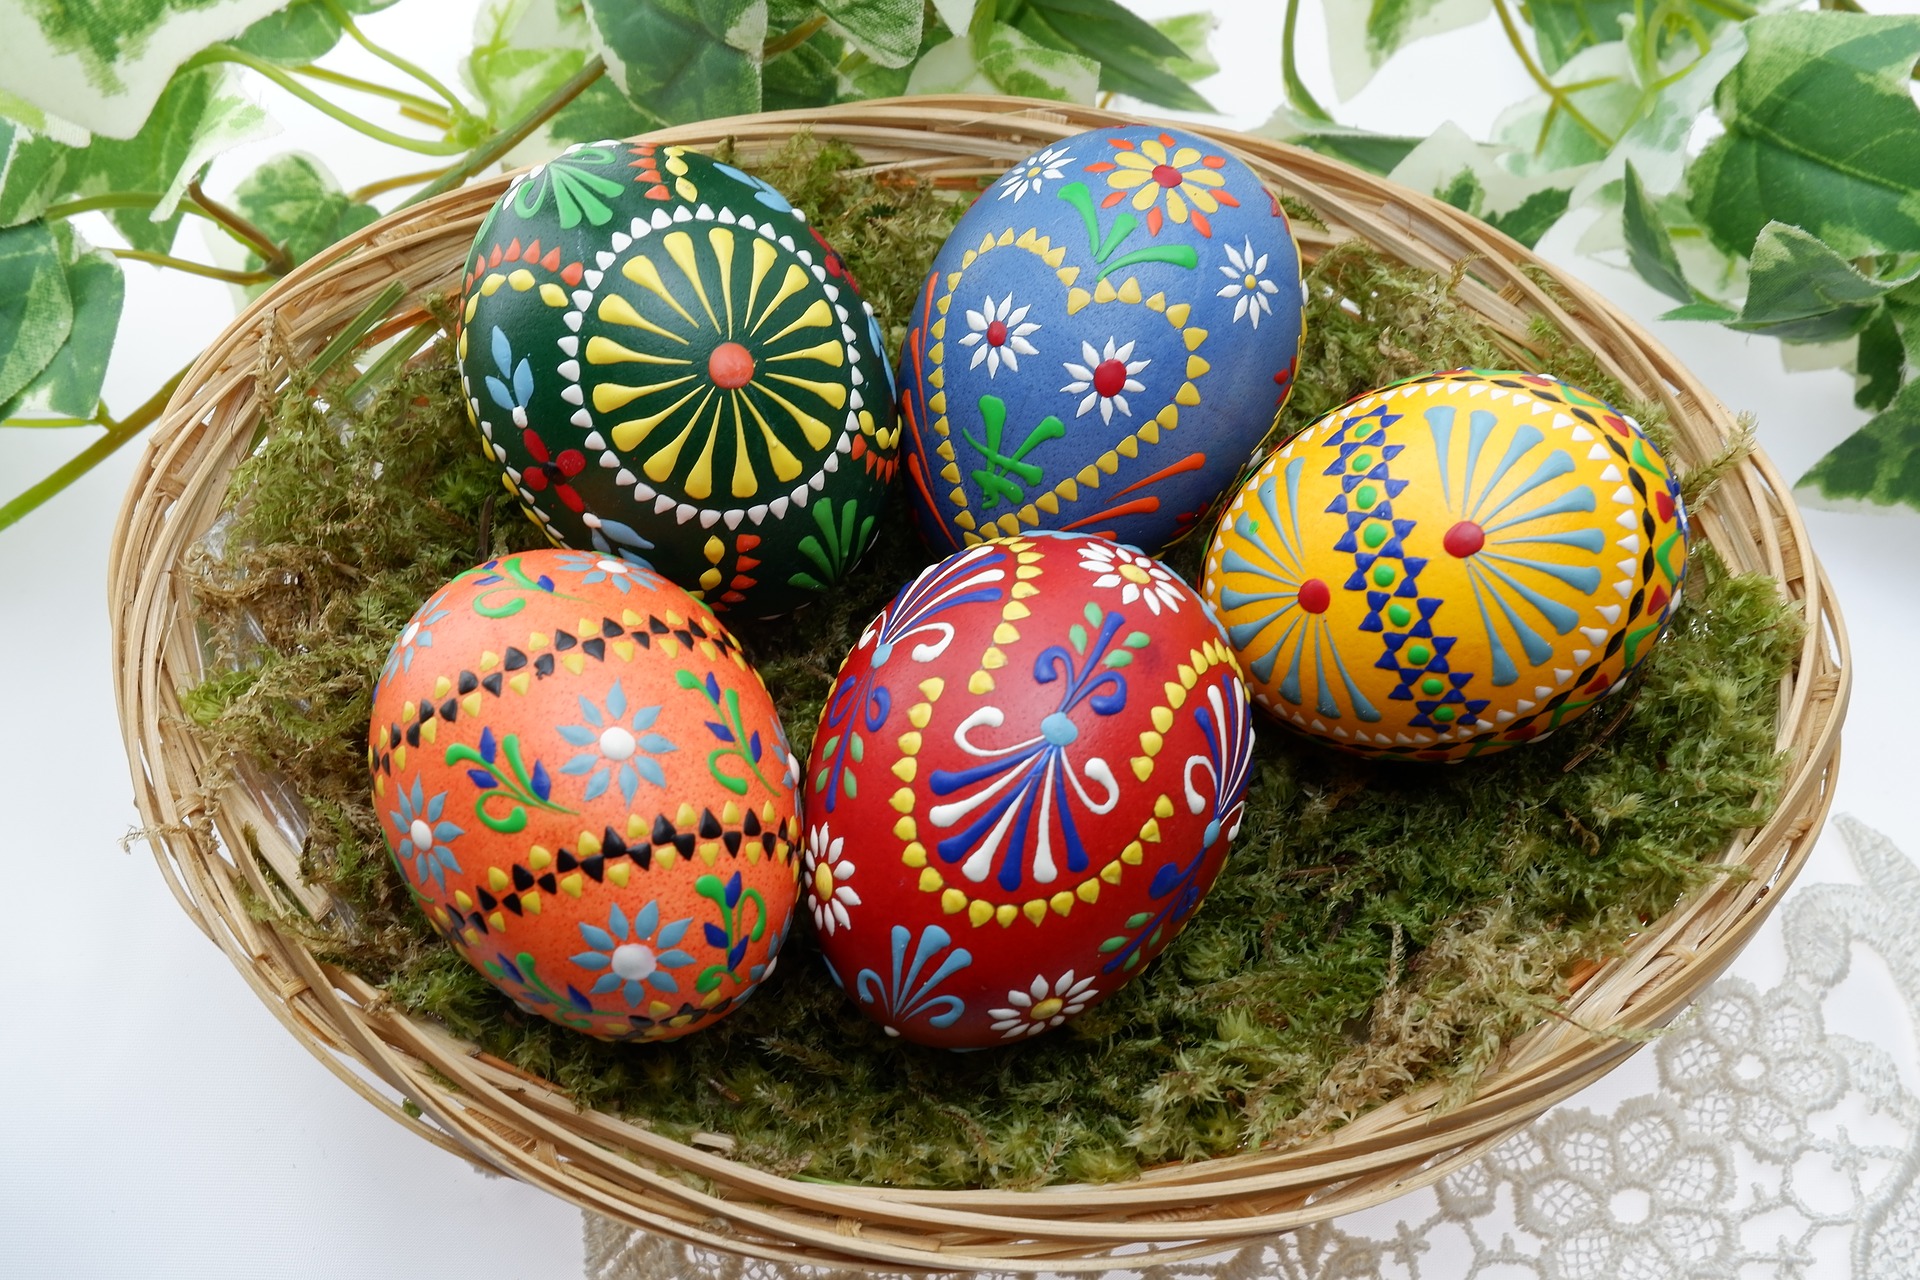 Easter eggs decorated with colorful, intricate patterns in a basket